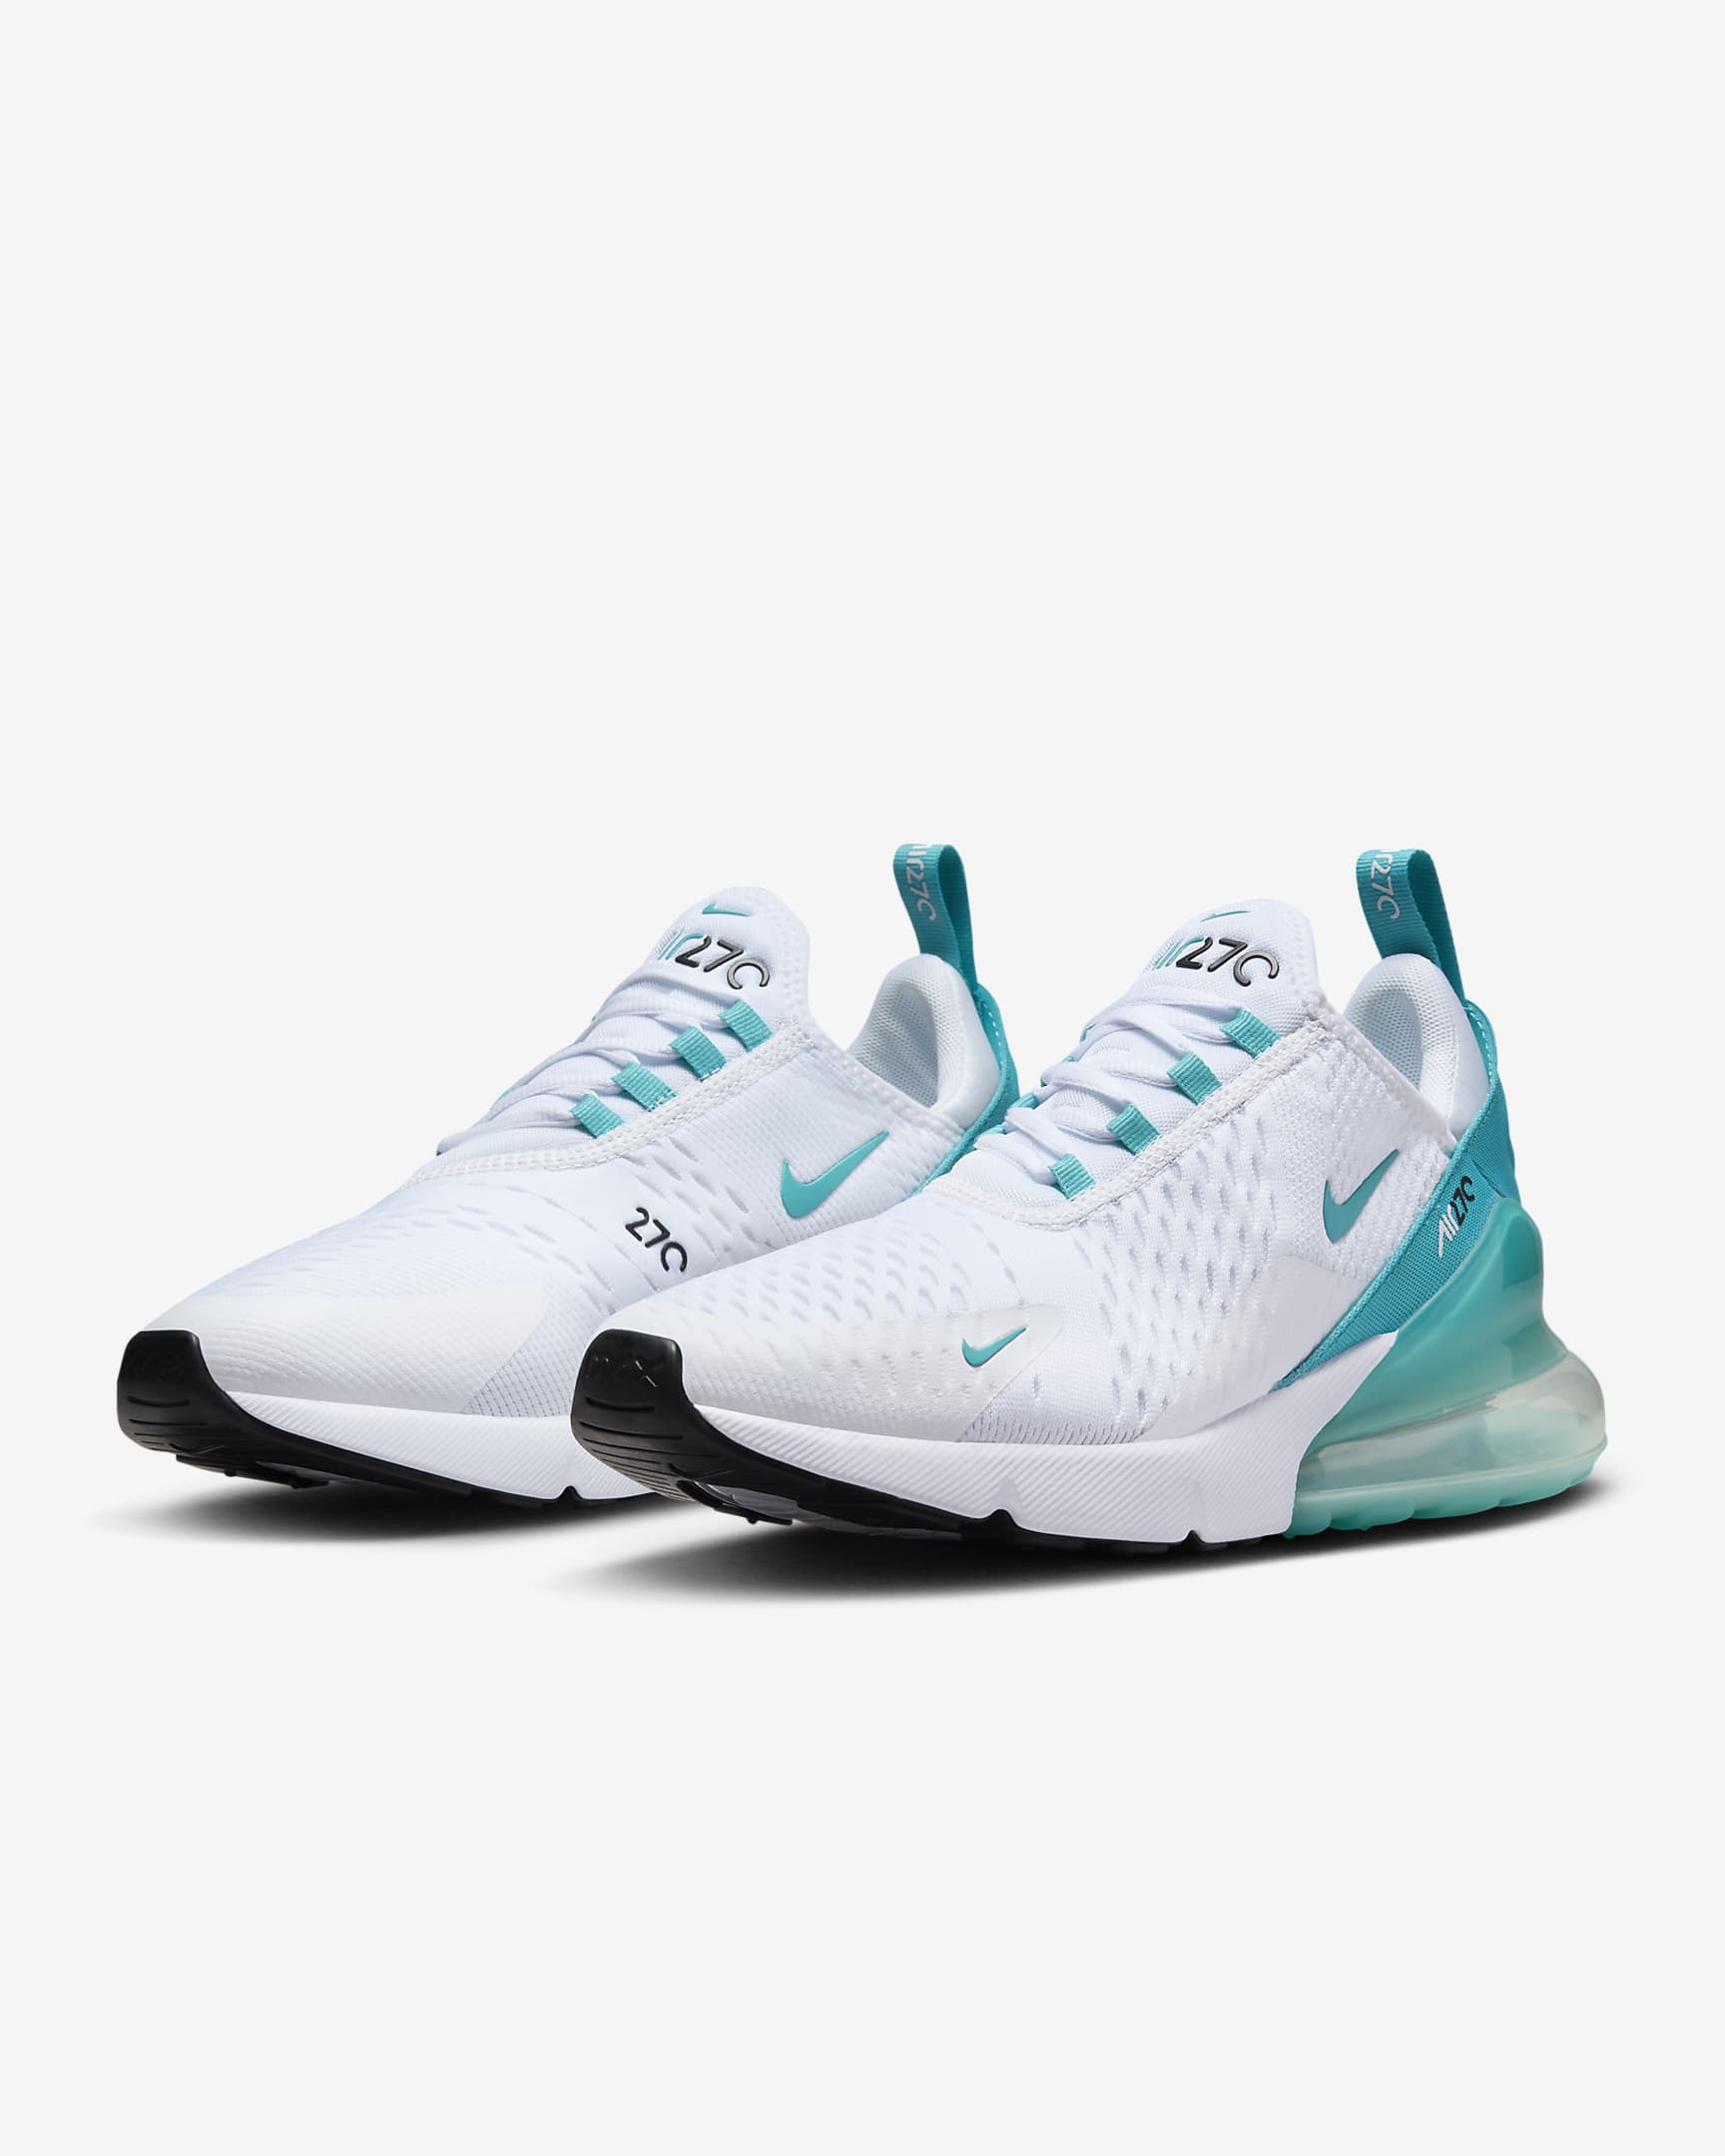 Nike Air Max 270 Women's Shoes - White/Dusty Cactus/Black/Dusty Cactus